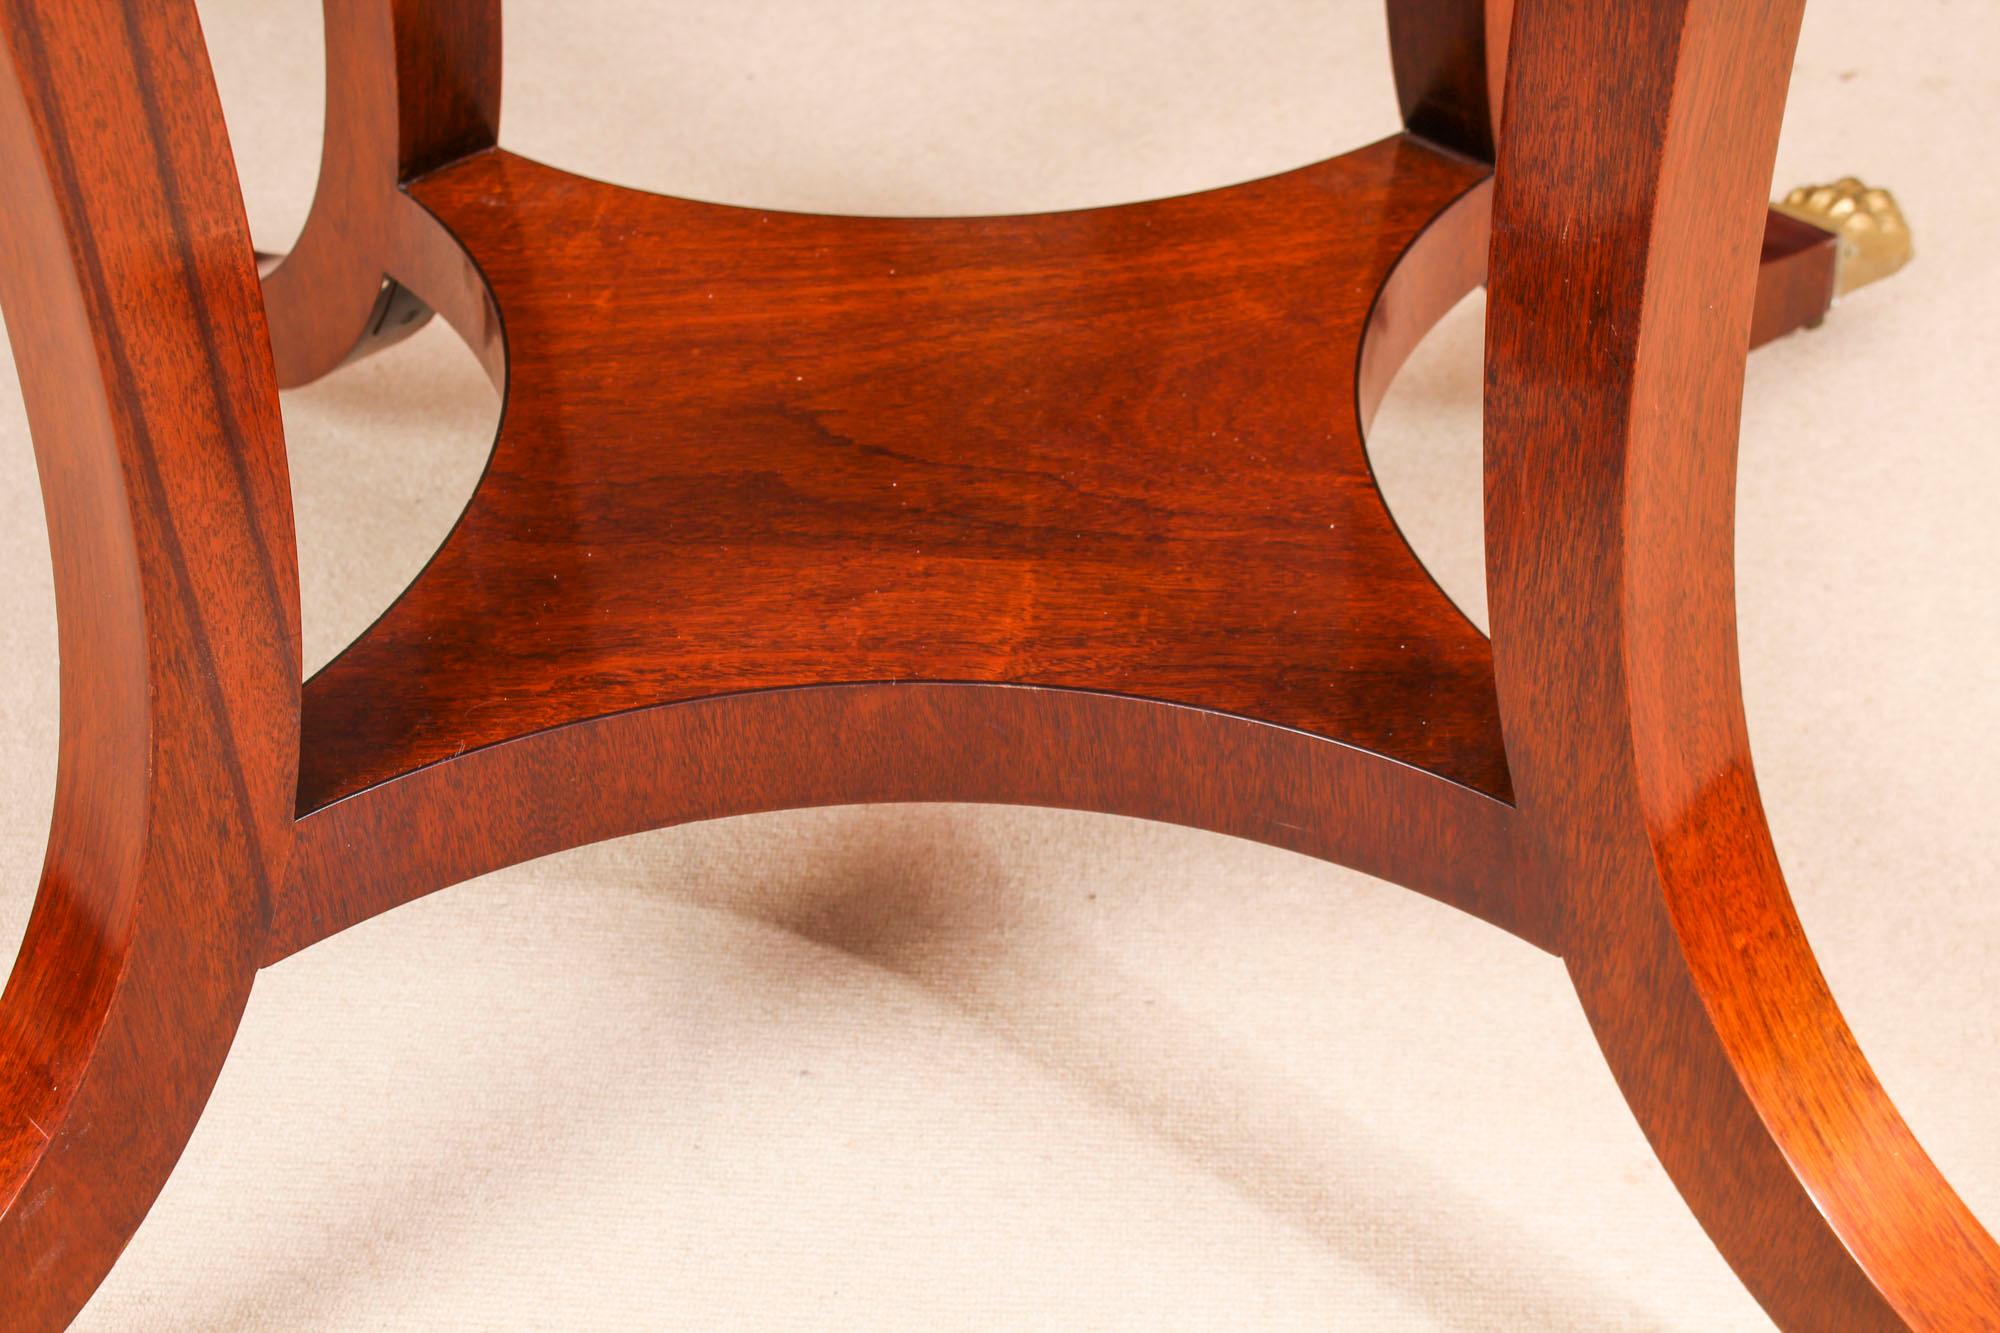 Mahogany Vintage Round Table and 8 Bespoke Chairs William Tillman, 20th Century